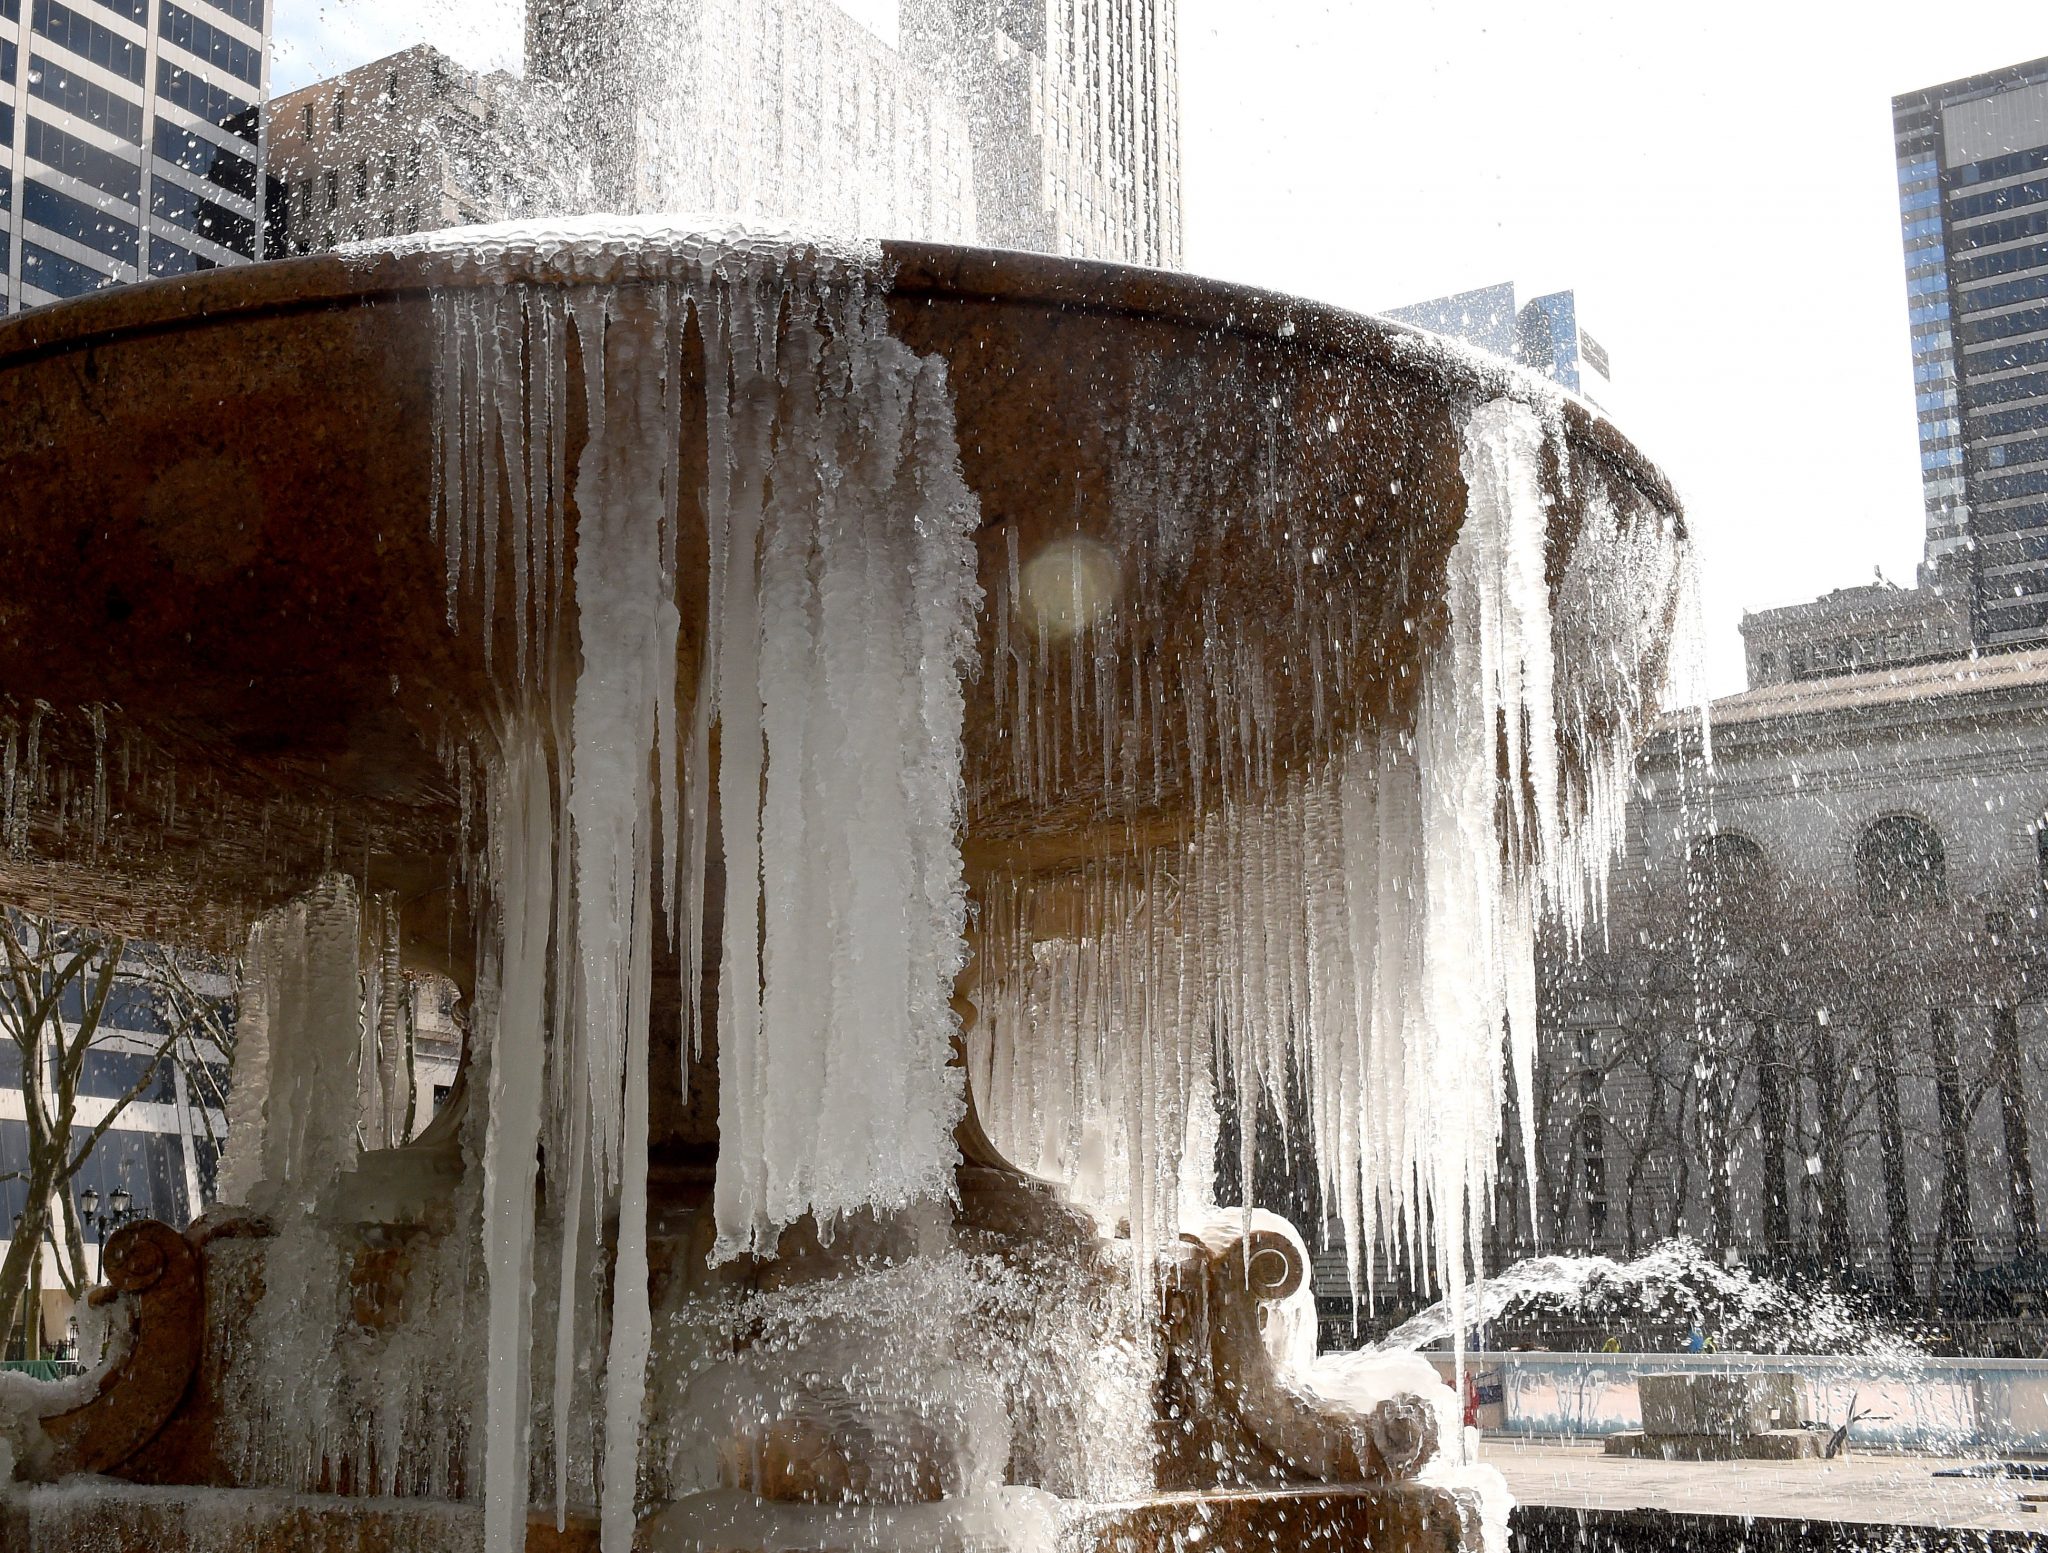 The  Josephine Shaw Lowell Memorial Fountain in Bryant Park is covered in ice on March 13, 2017 as the weather continues to be below freezing.  The northeastern United States braced Monday for what meteorologists predict could be the worst winter storm of the season, with blizzards feared to dump knee-high snow on New York. / AFP PHOTO / TIMOTHY A. CLARY